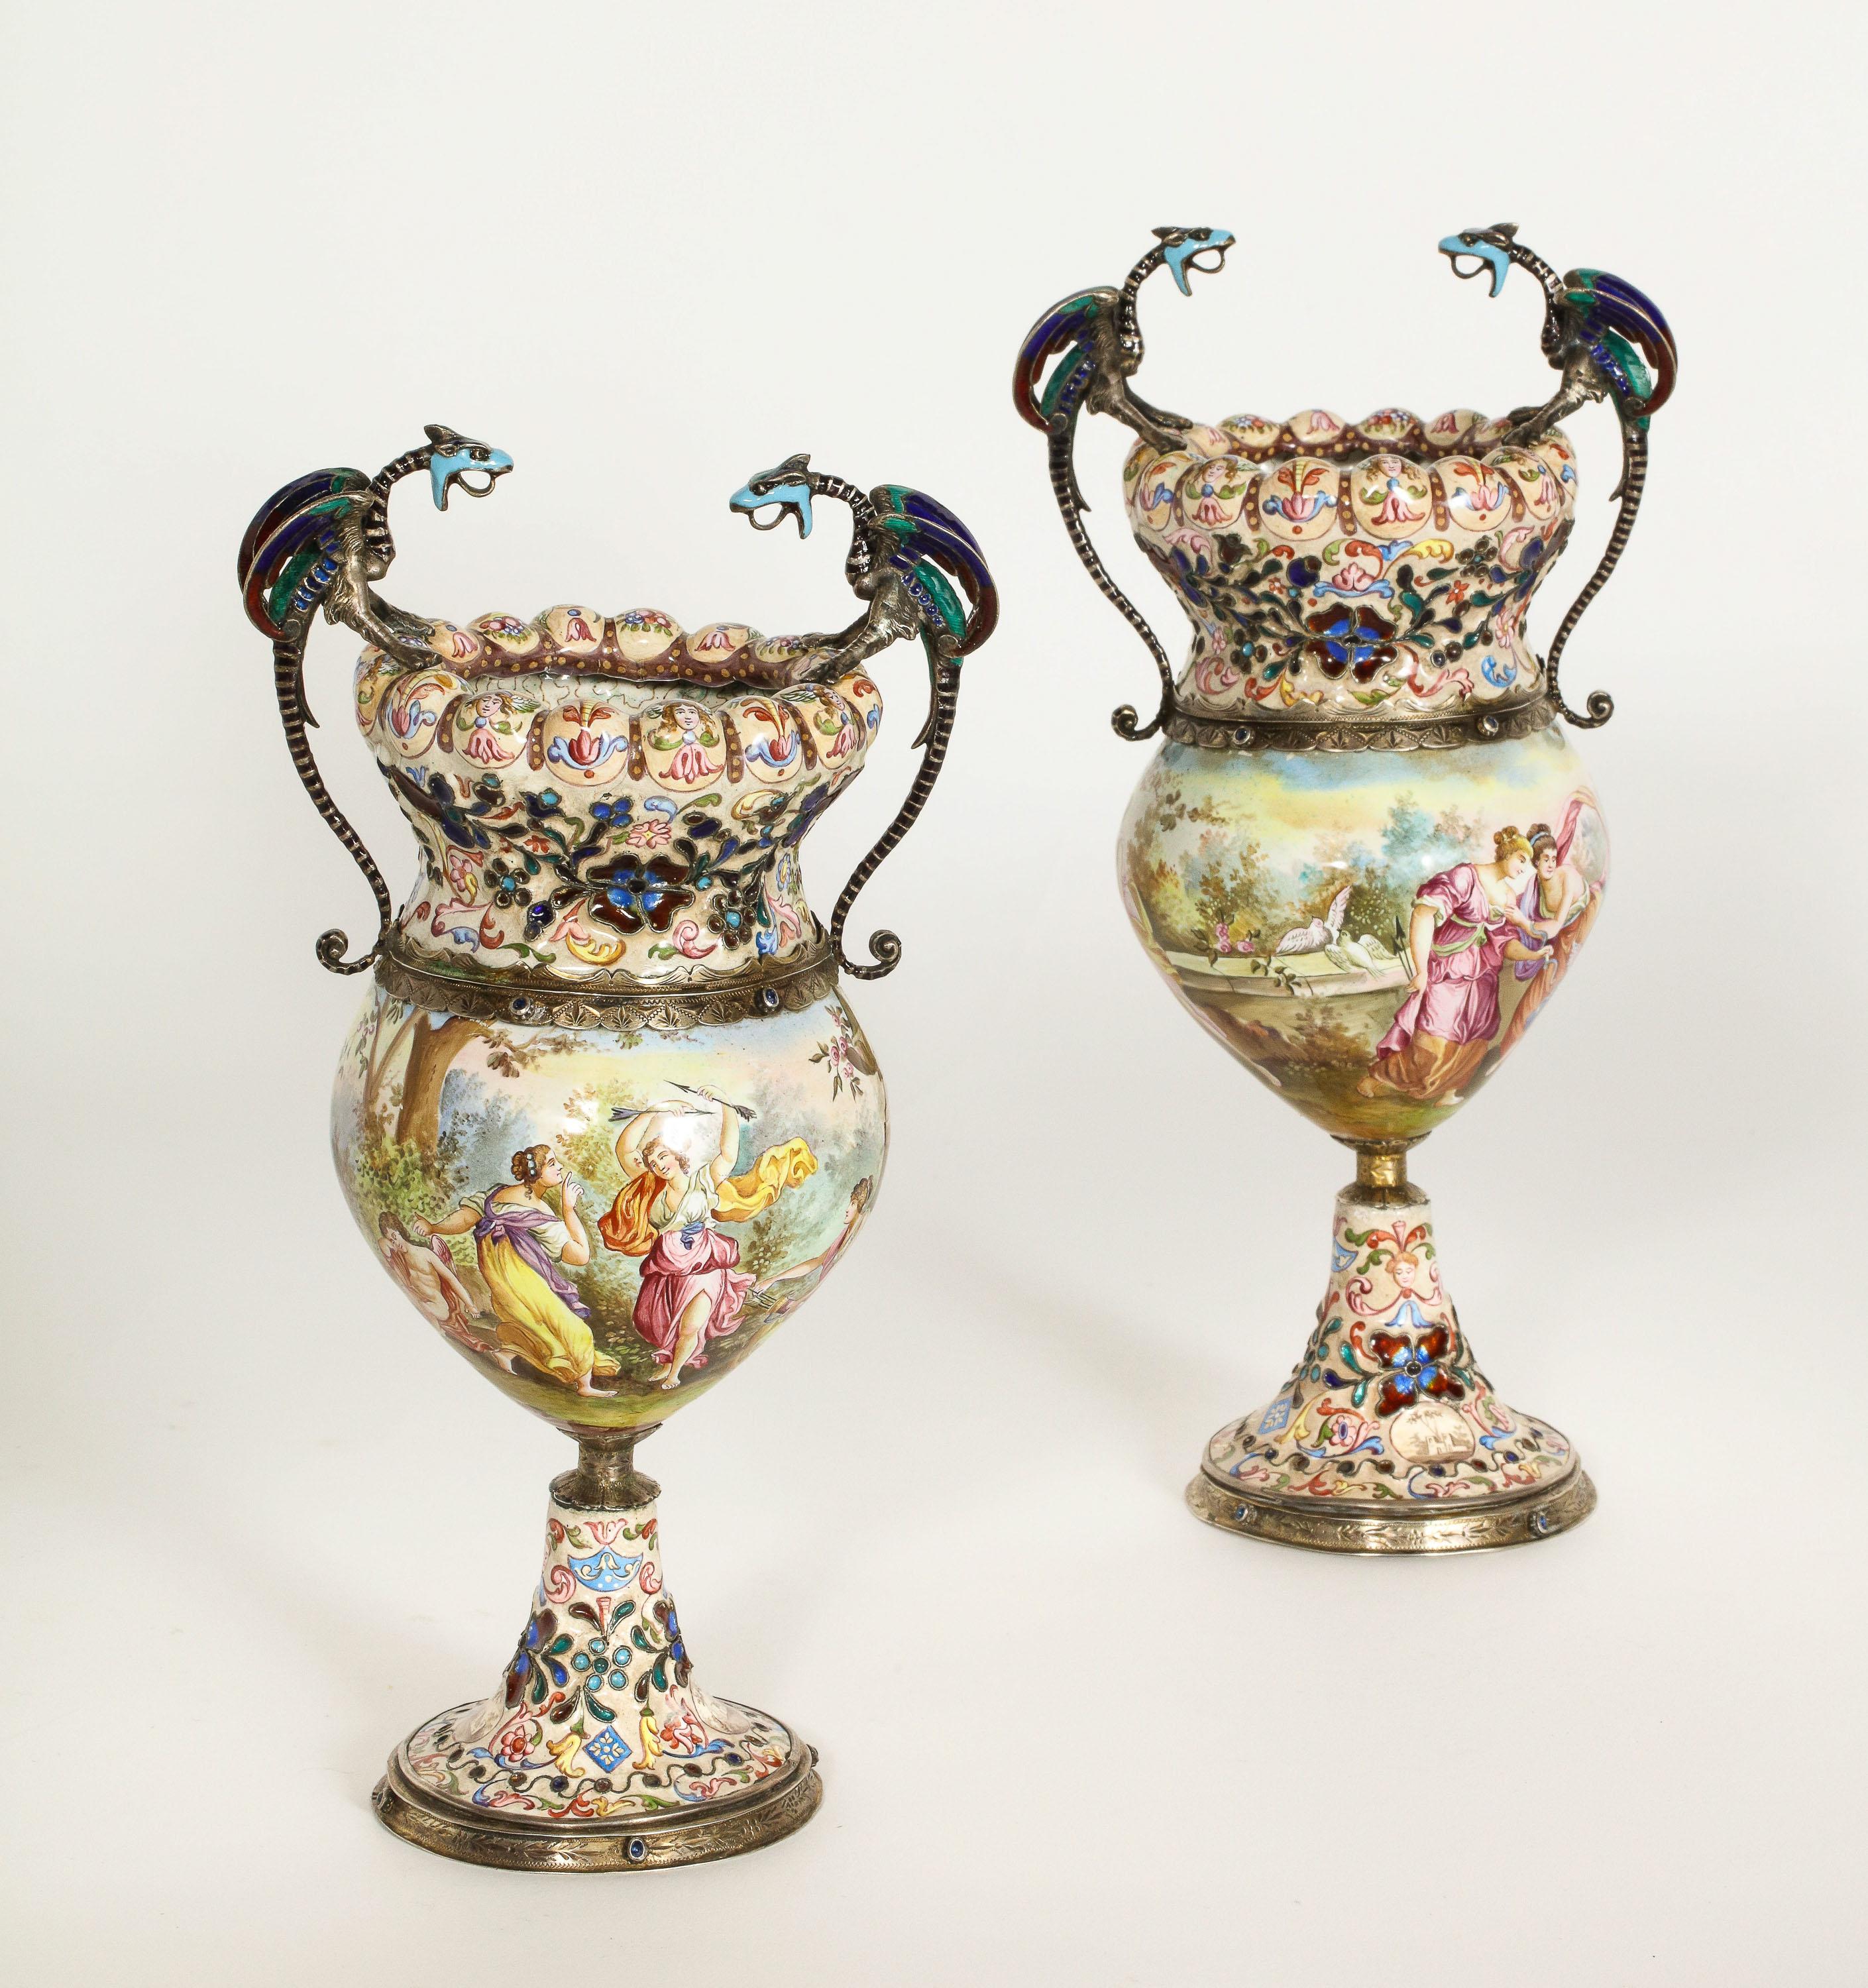 Hermann Bohm, a fine pair of Viennese Austrian silver-mounted enamel vases, circa 1870.

Very nice quality, with dragon handles and very finely painted with classical scenes.

Hallmarked throughout. 

Good condition, no chips, cracks, or